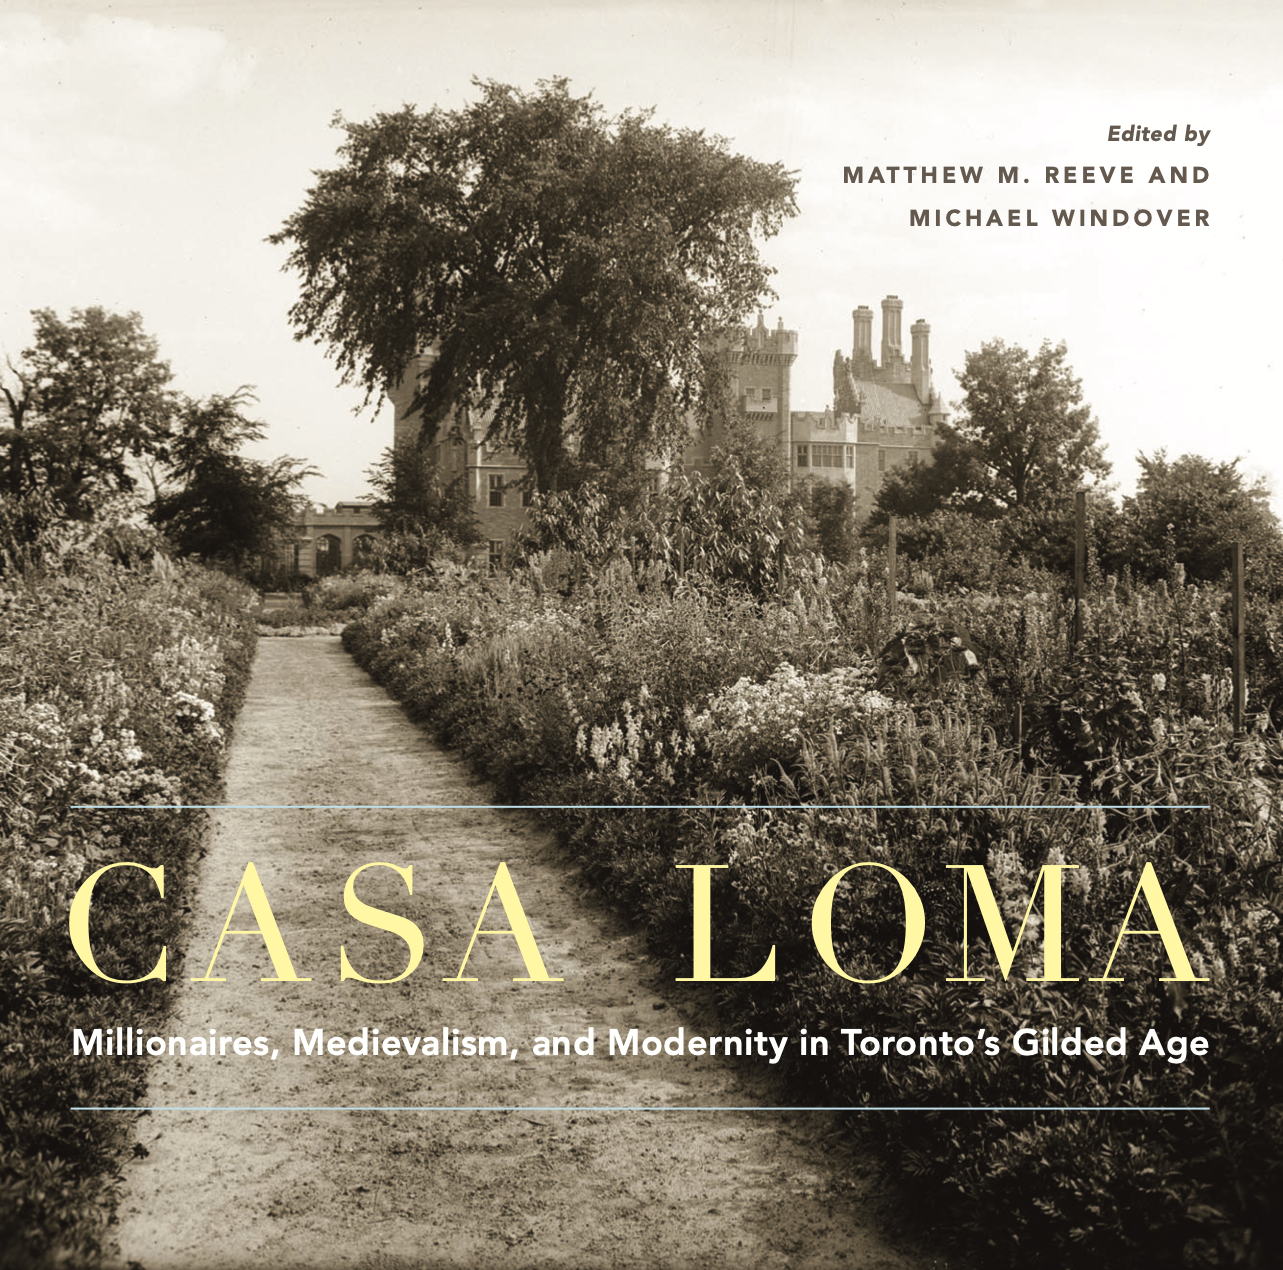 Casa Loma: Millionaires, Medievalism, and Modernity in Toronto's Gilded Age (McGill-Queens University Press, 2023).